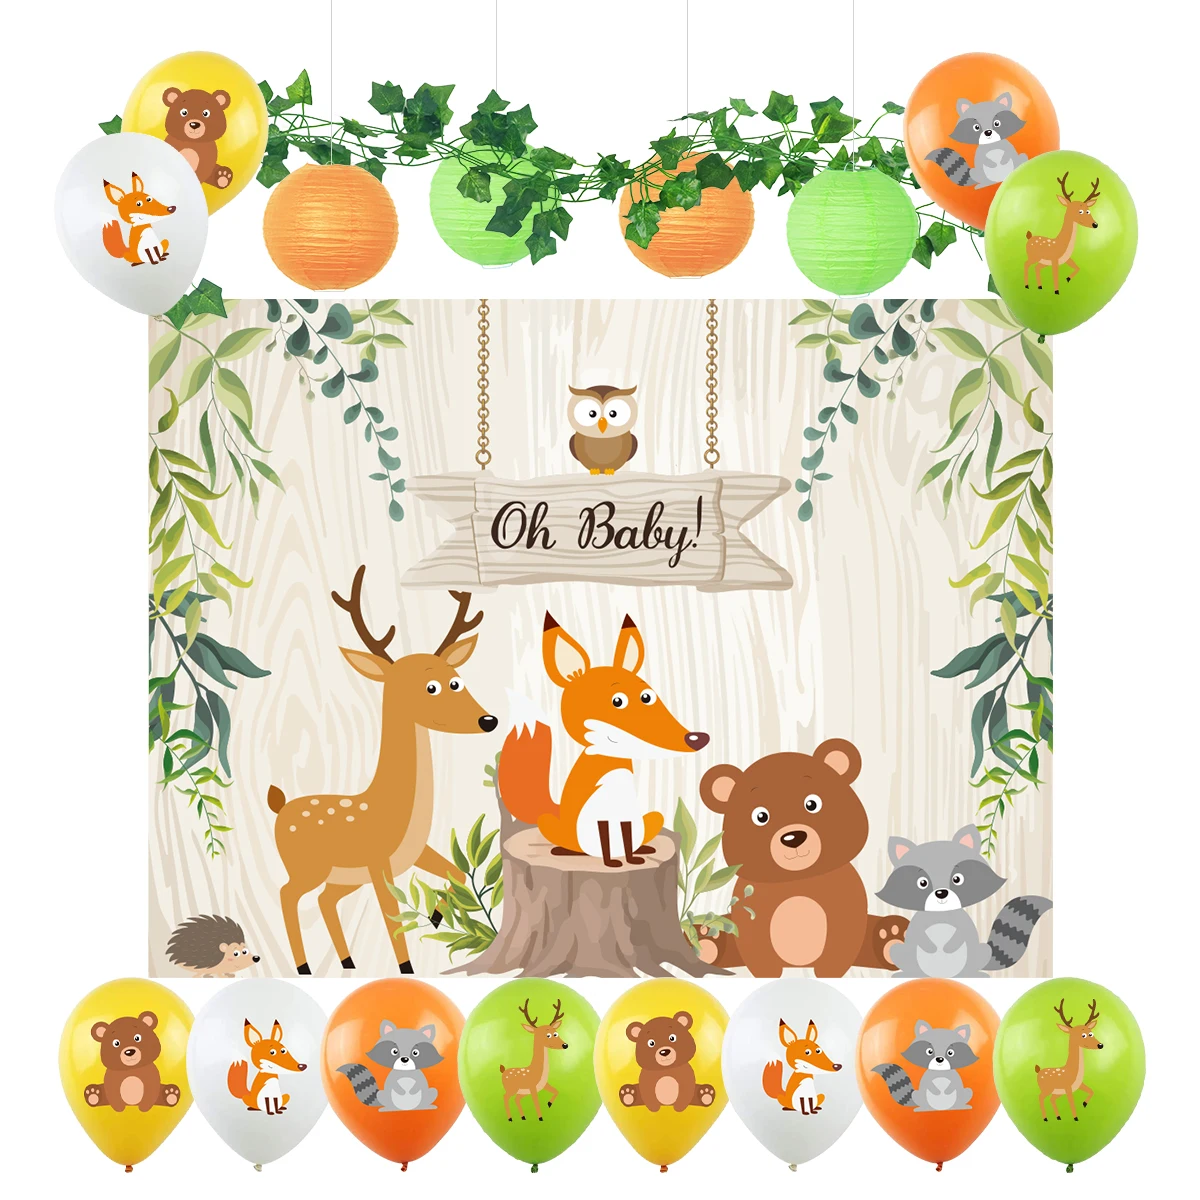 Download Umiss 2020 Woodland Oh Baby Shower Backdrop Background Banner Balloon Paper Lantern For Party Supplies Buy Baby Shower Background Oh Baby Backdrop Baby Shower Banner Product On Alibaba Com